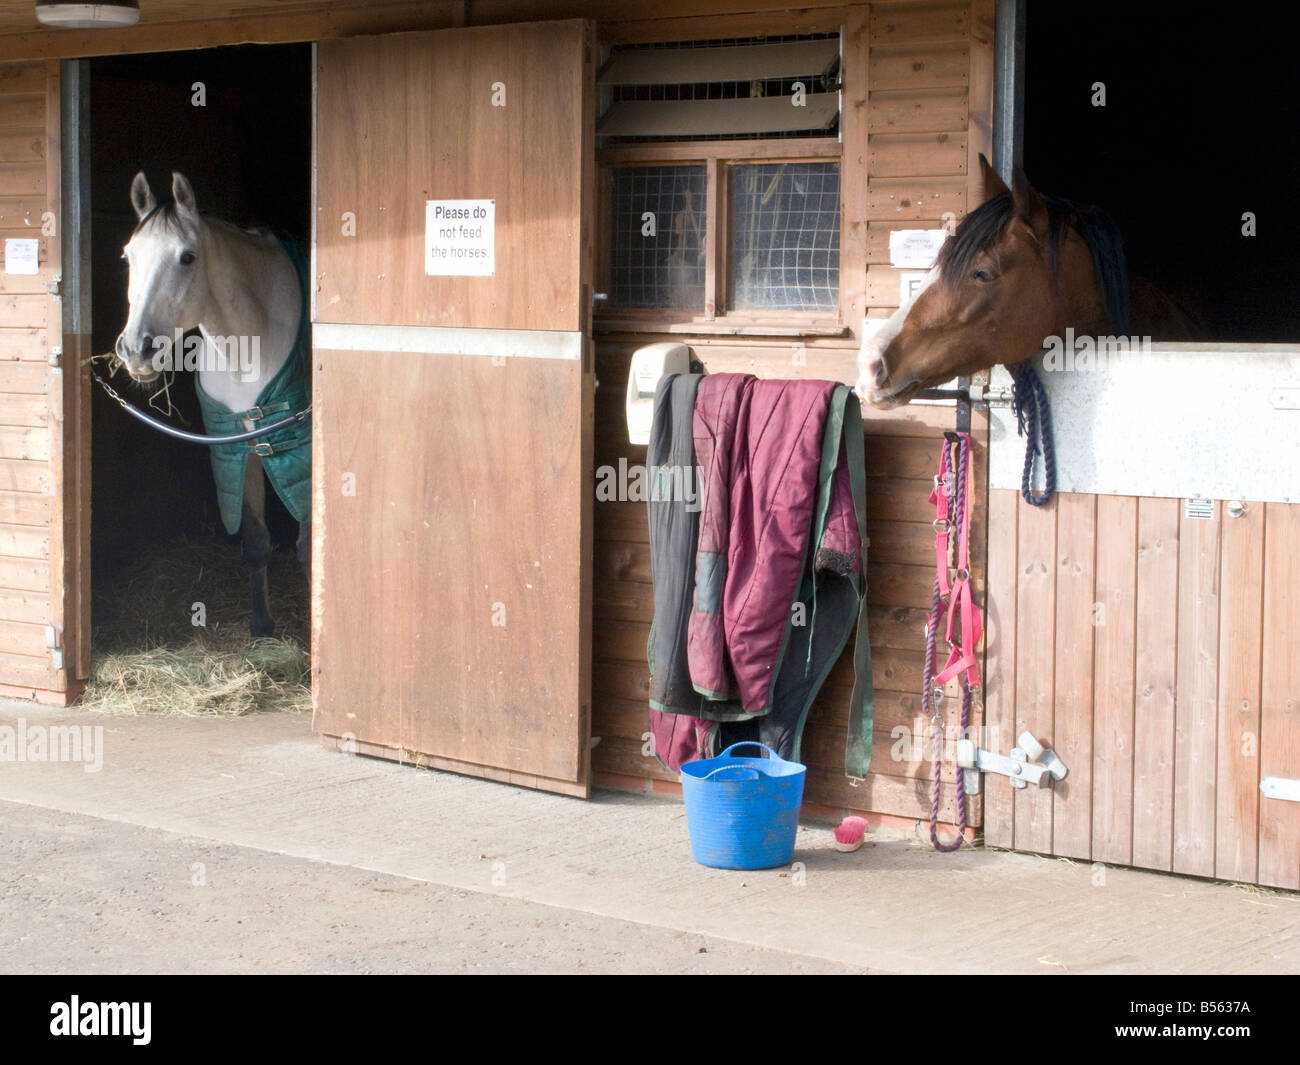 UK- Horse stables at Lee Valley Riding Centre and nature reserve in London Photo © Julio Etchart Stock Photo